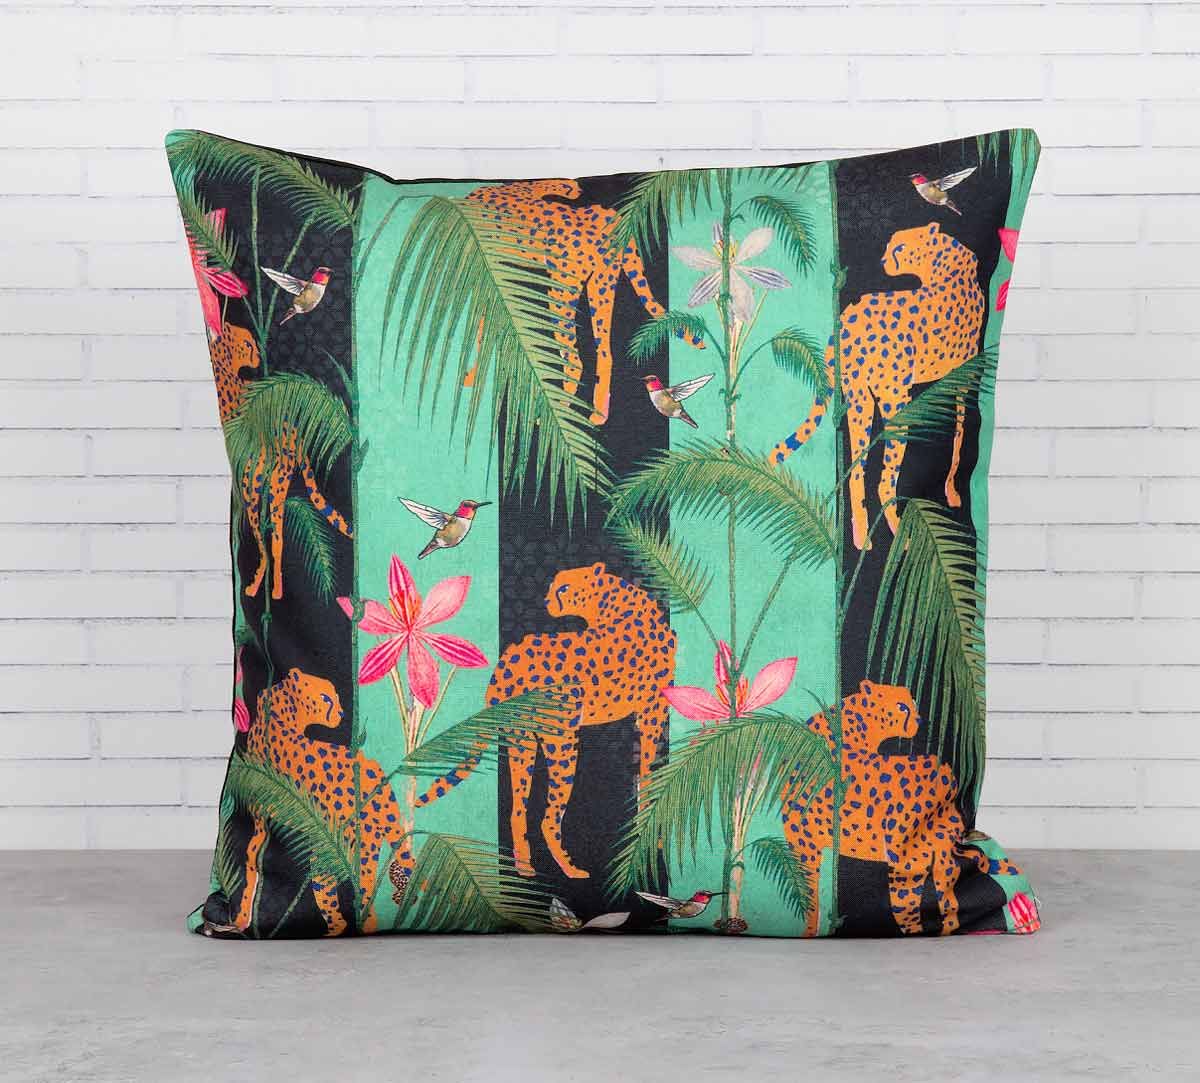 India Circus The Famished Cheetah Cushion Cover